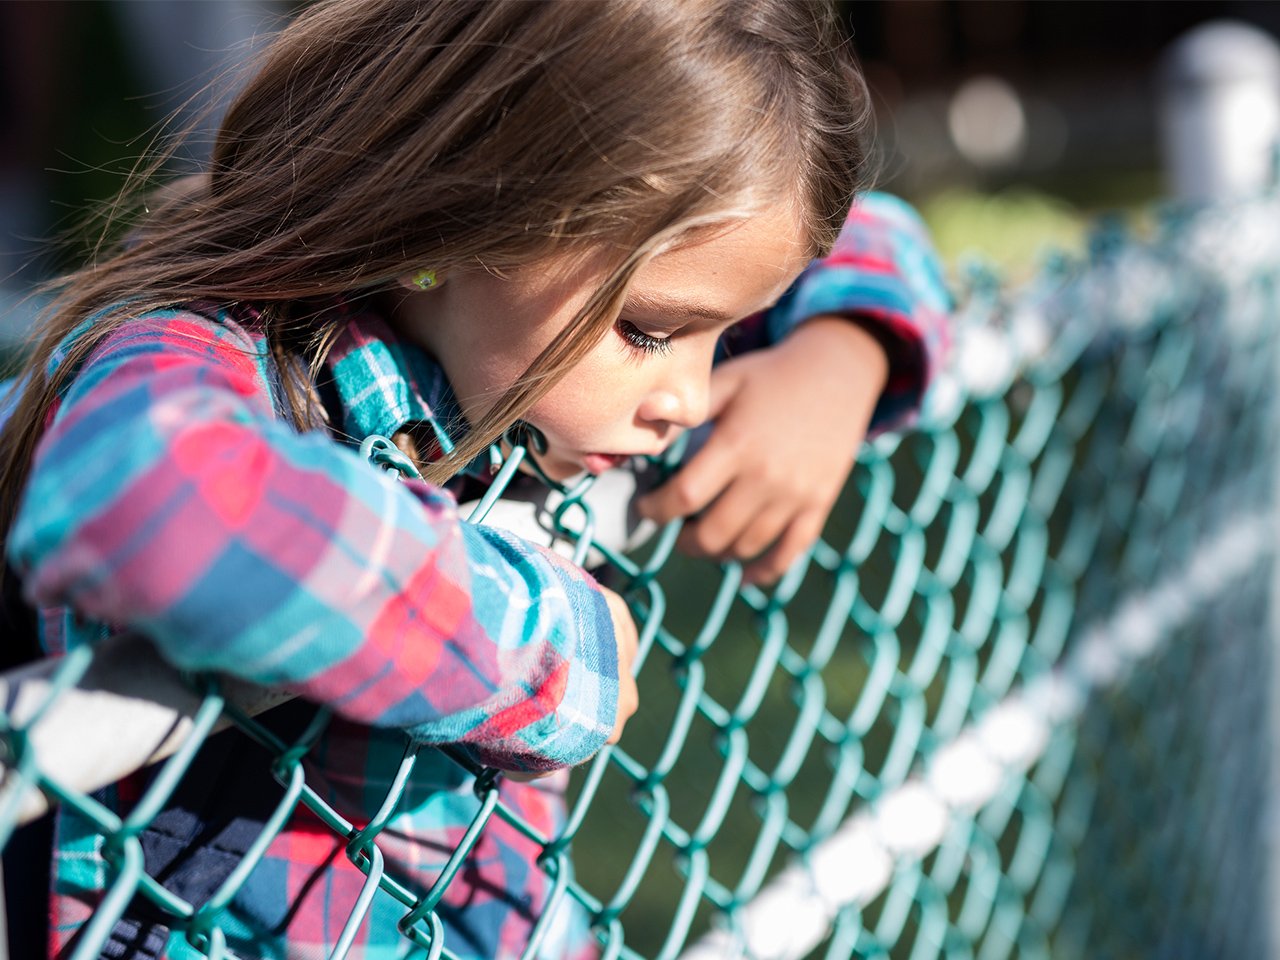 kid leaning on a chain link fence looking sad